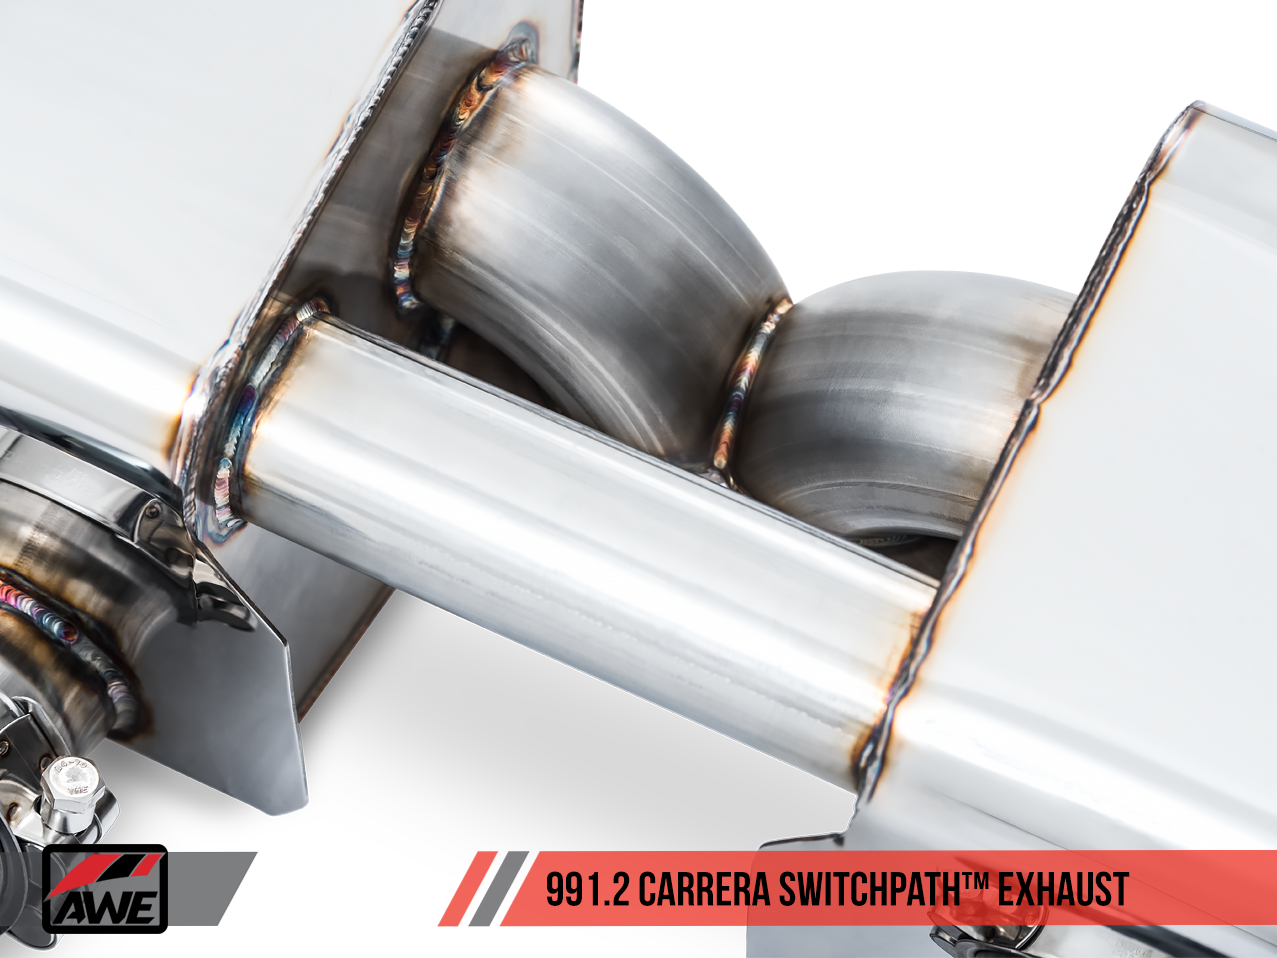 AWE SwitchPath Exhaust for 991.2 Carrera / S